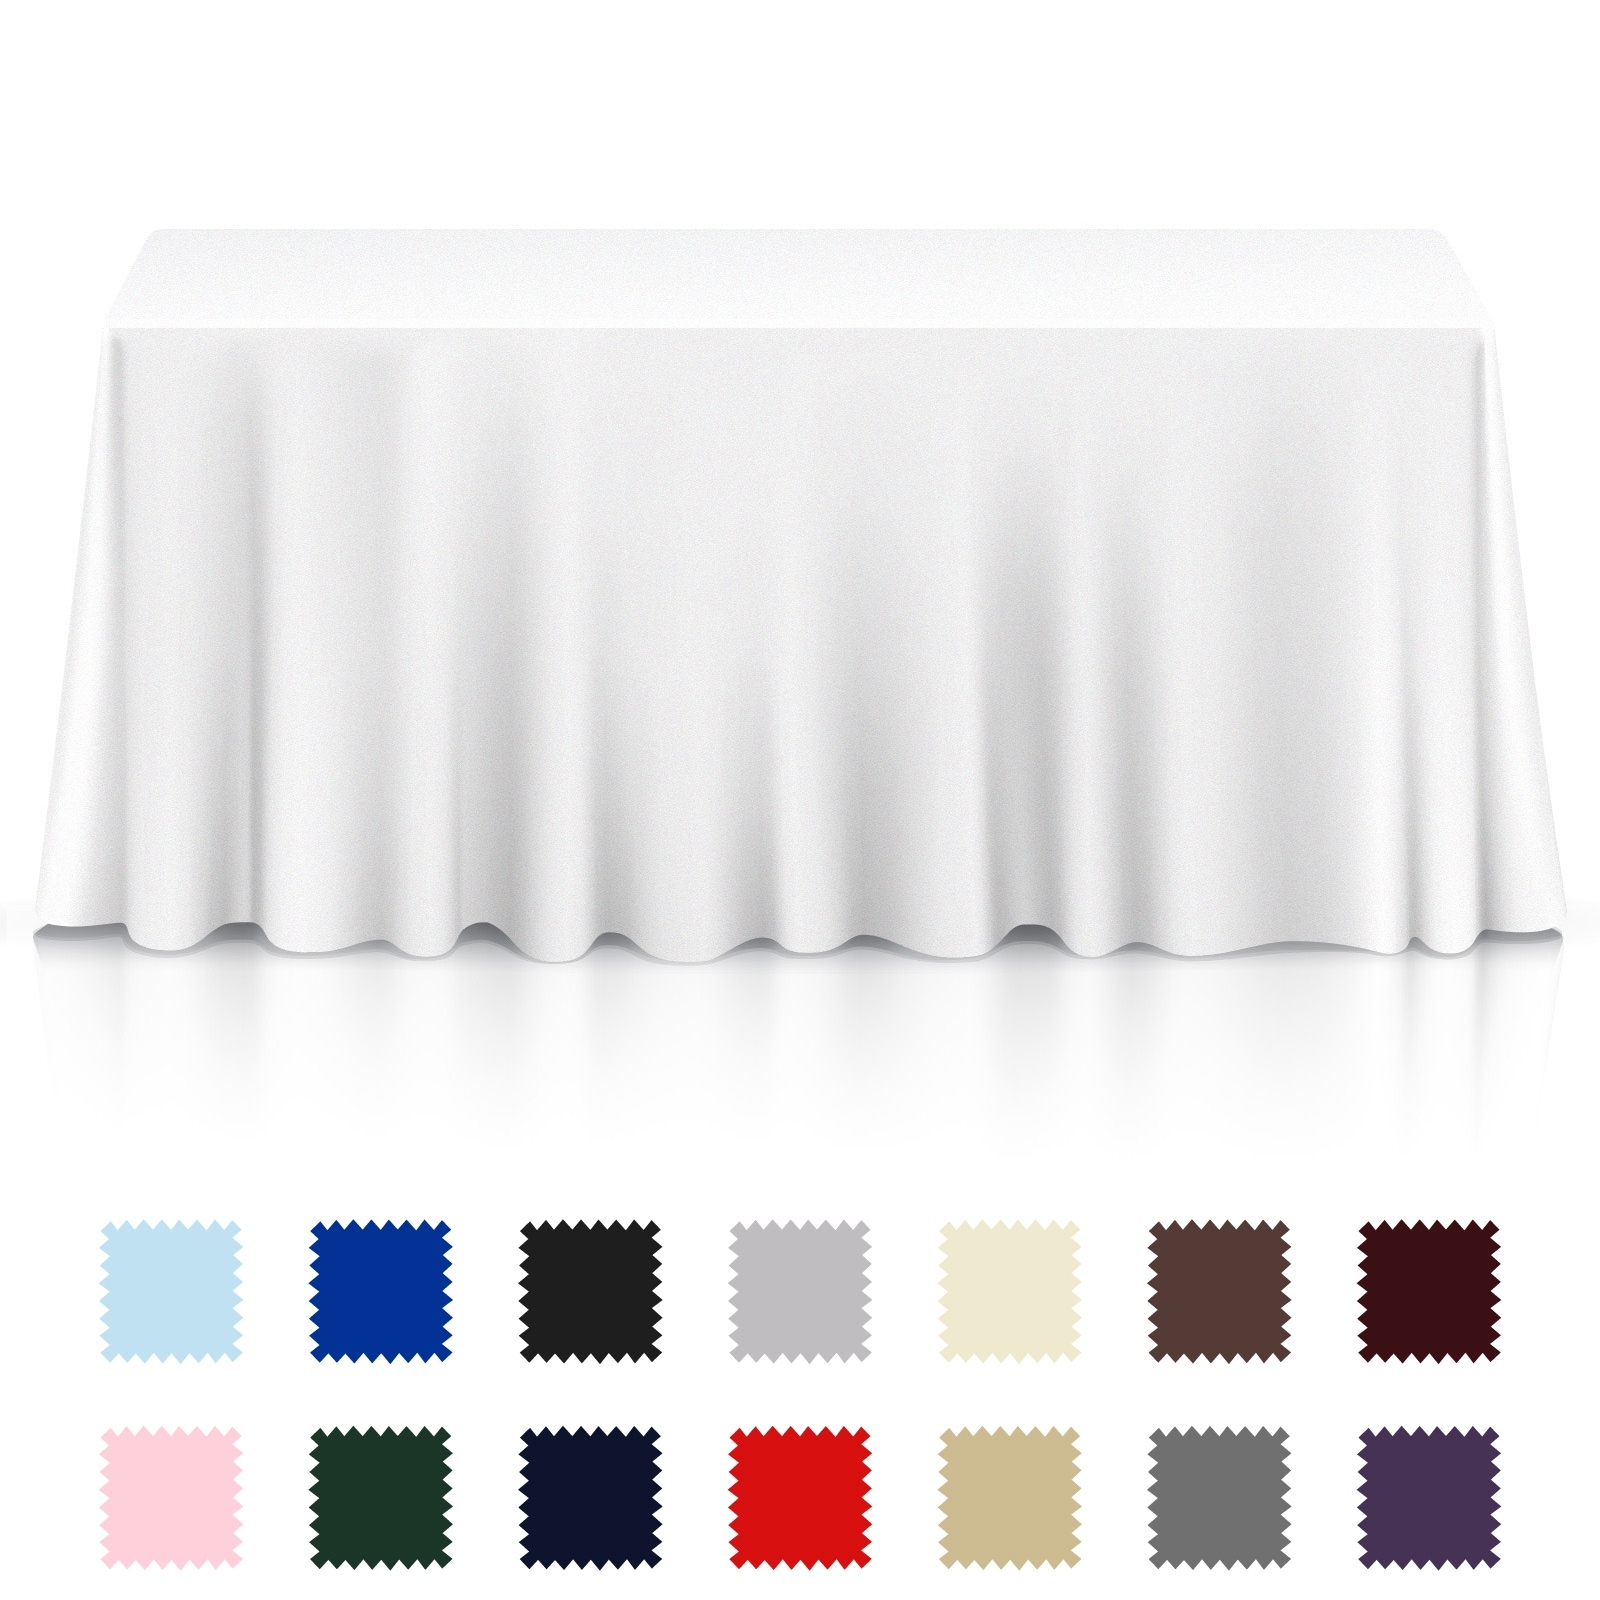 https://ak1.ostkcdn.com/images/products/is/images/direct/82df2ddd022fcf6e8657c007d455a049df703aad/Lann%27s-Linens---5-Premium-Tablecloths-for-Wedding-Banquet-Restaurant---Rectangular-Polyester-Fabric-Table-Cloths.jpg